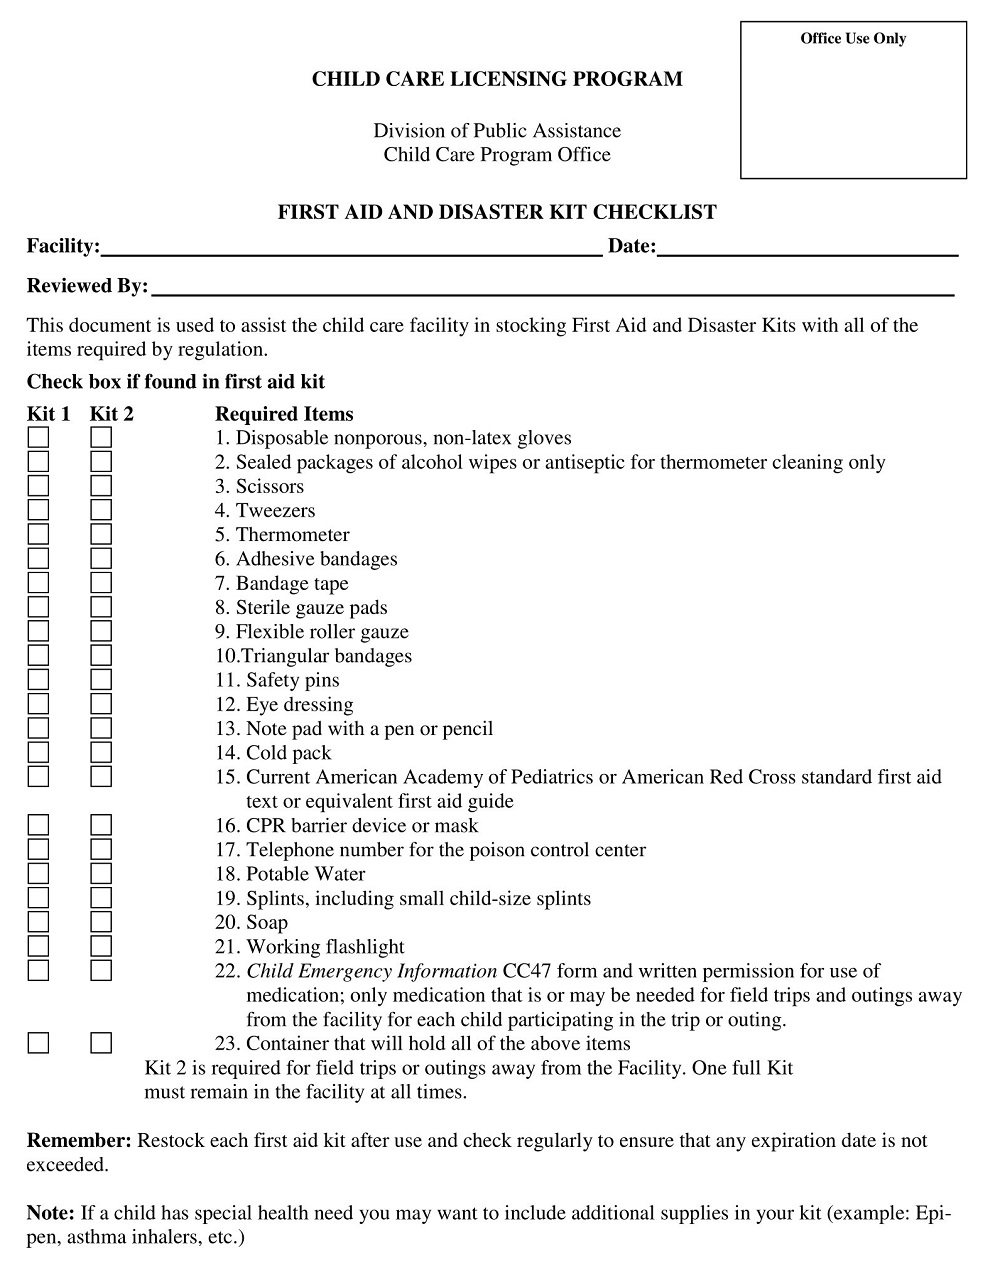 First Aid And Disaster Kit Checklist